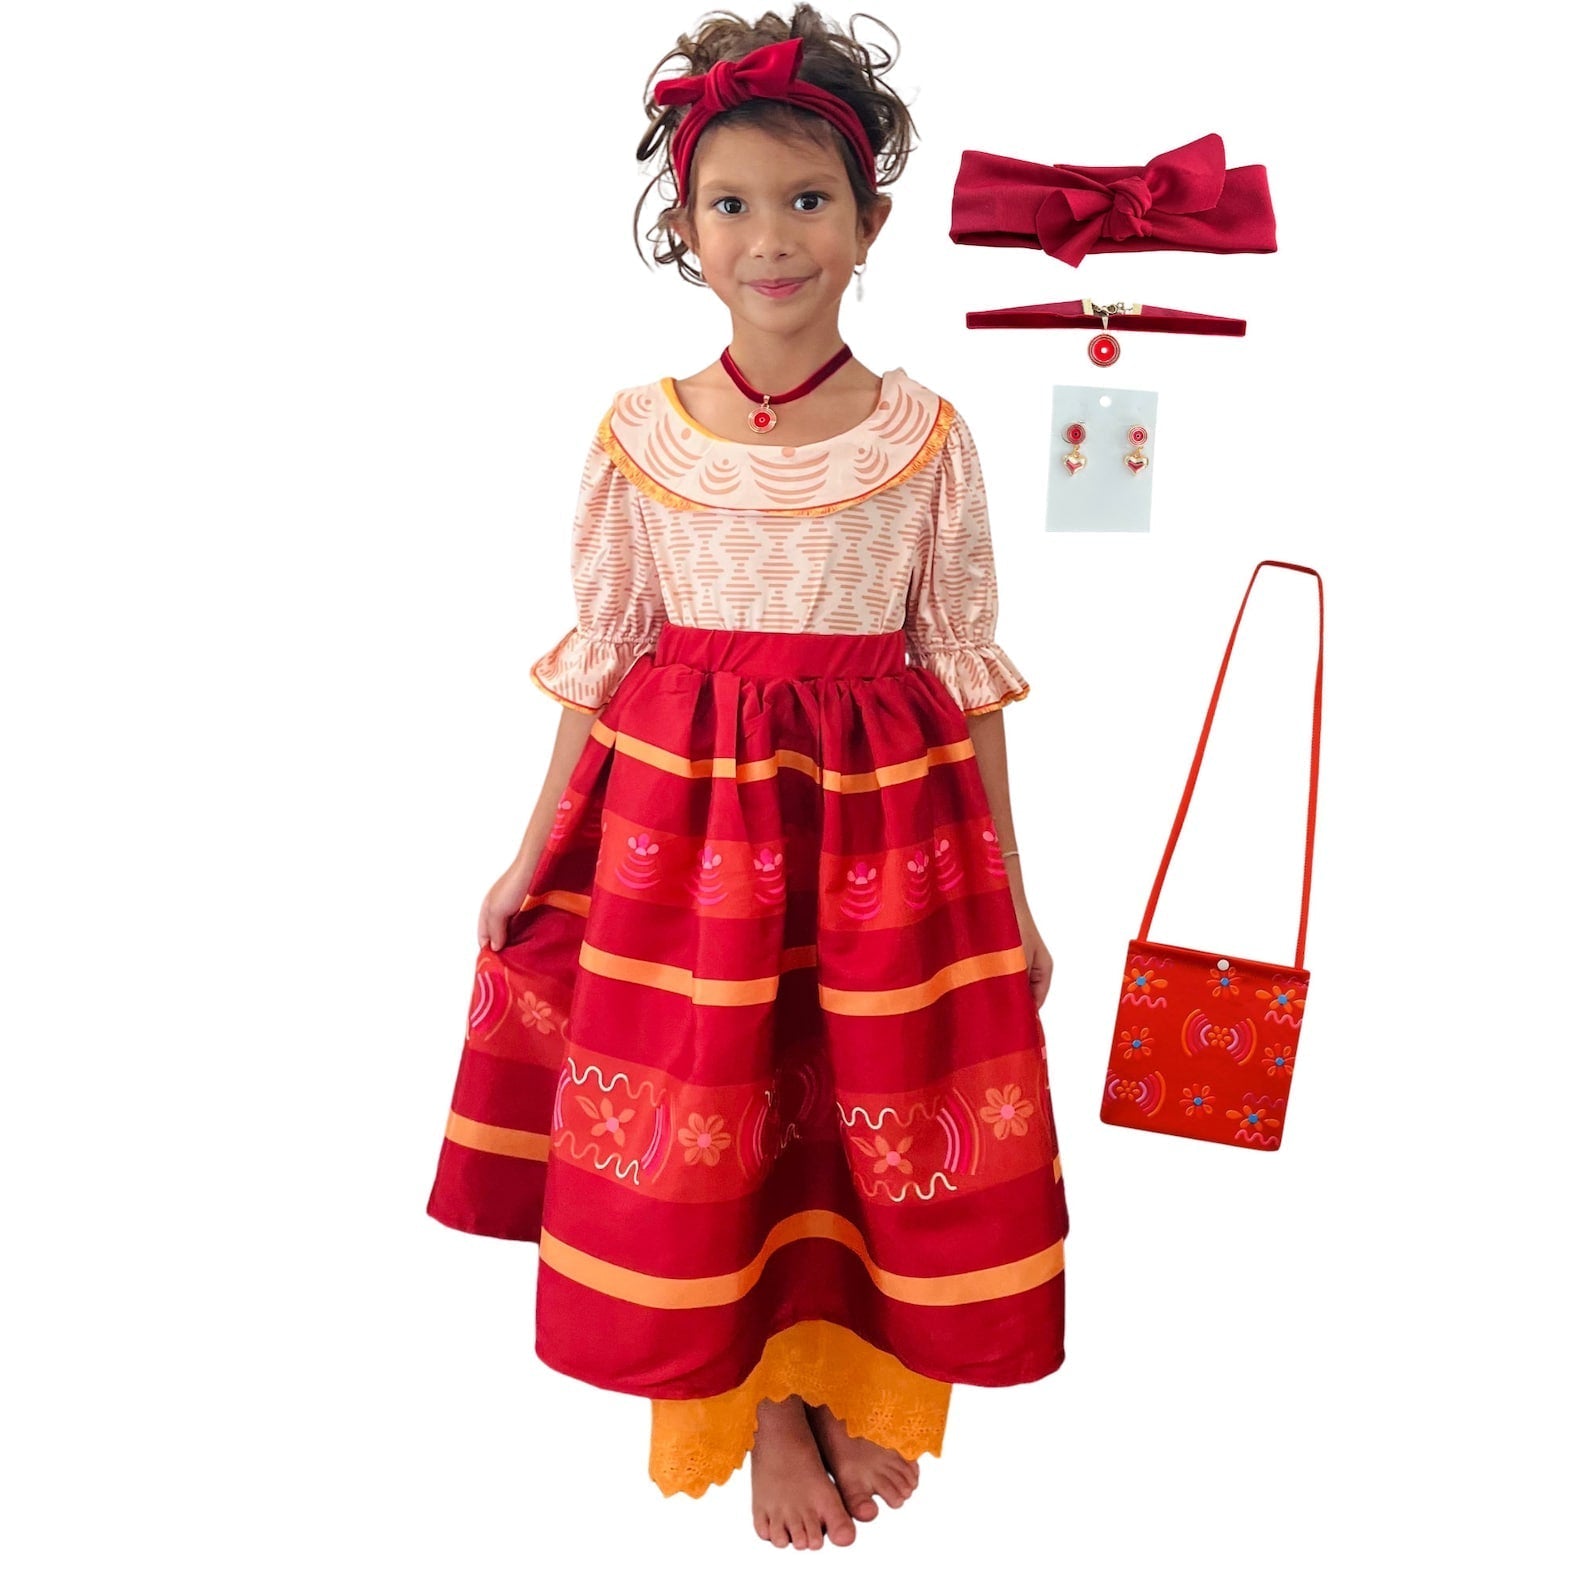 Encanto Dolores Dress with Beautiful Cotton Lace Trim, Costume Set with Headpiece, Earrings, and Necklace